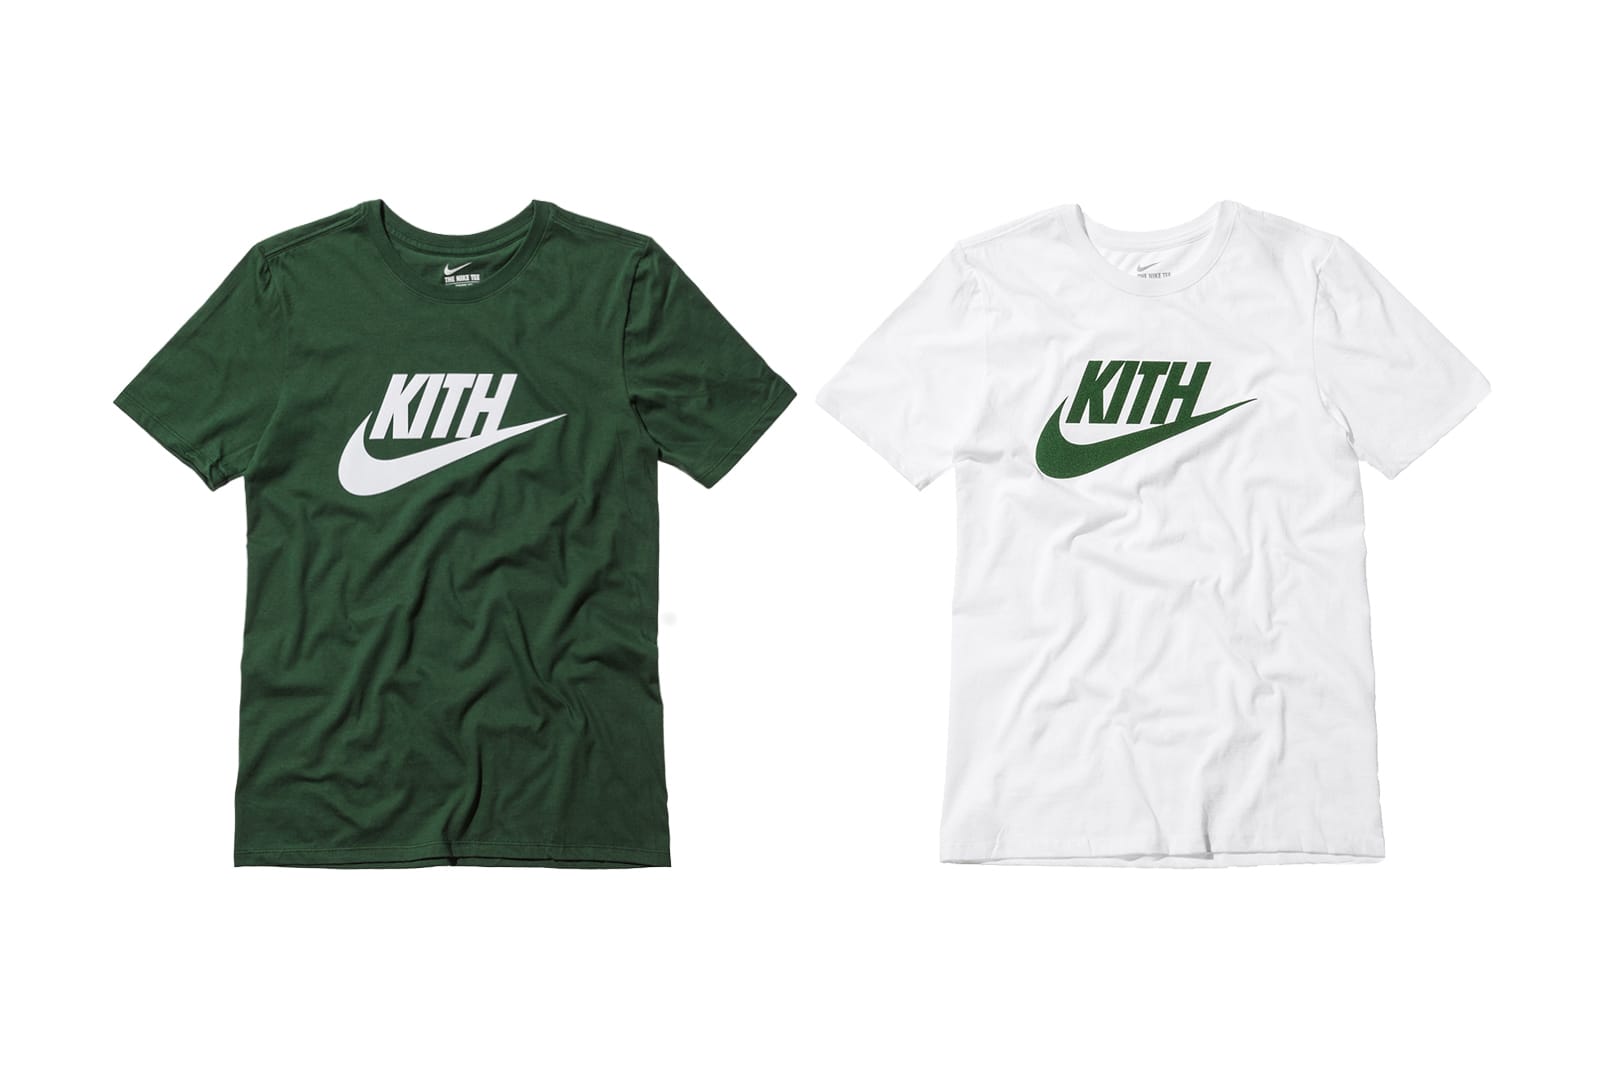 KITH and Nike Collaborate on Tees Inspired by Tennis | Hypebeast